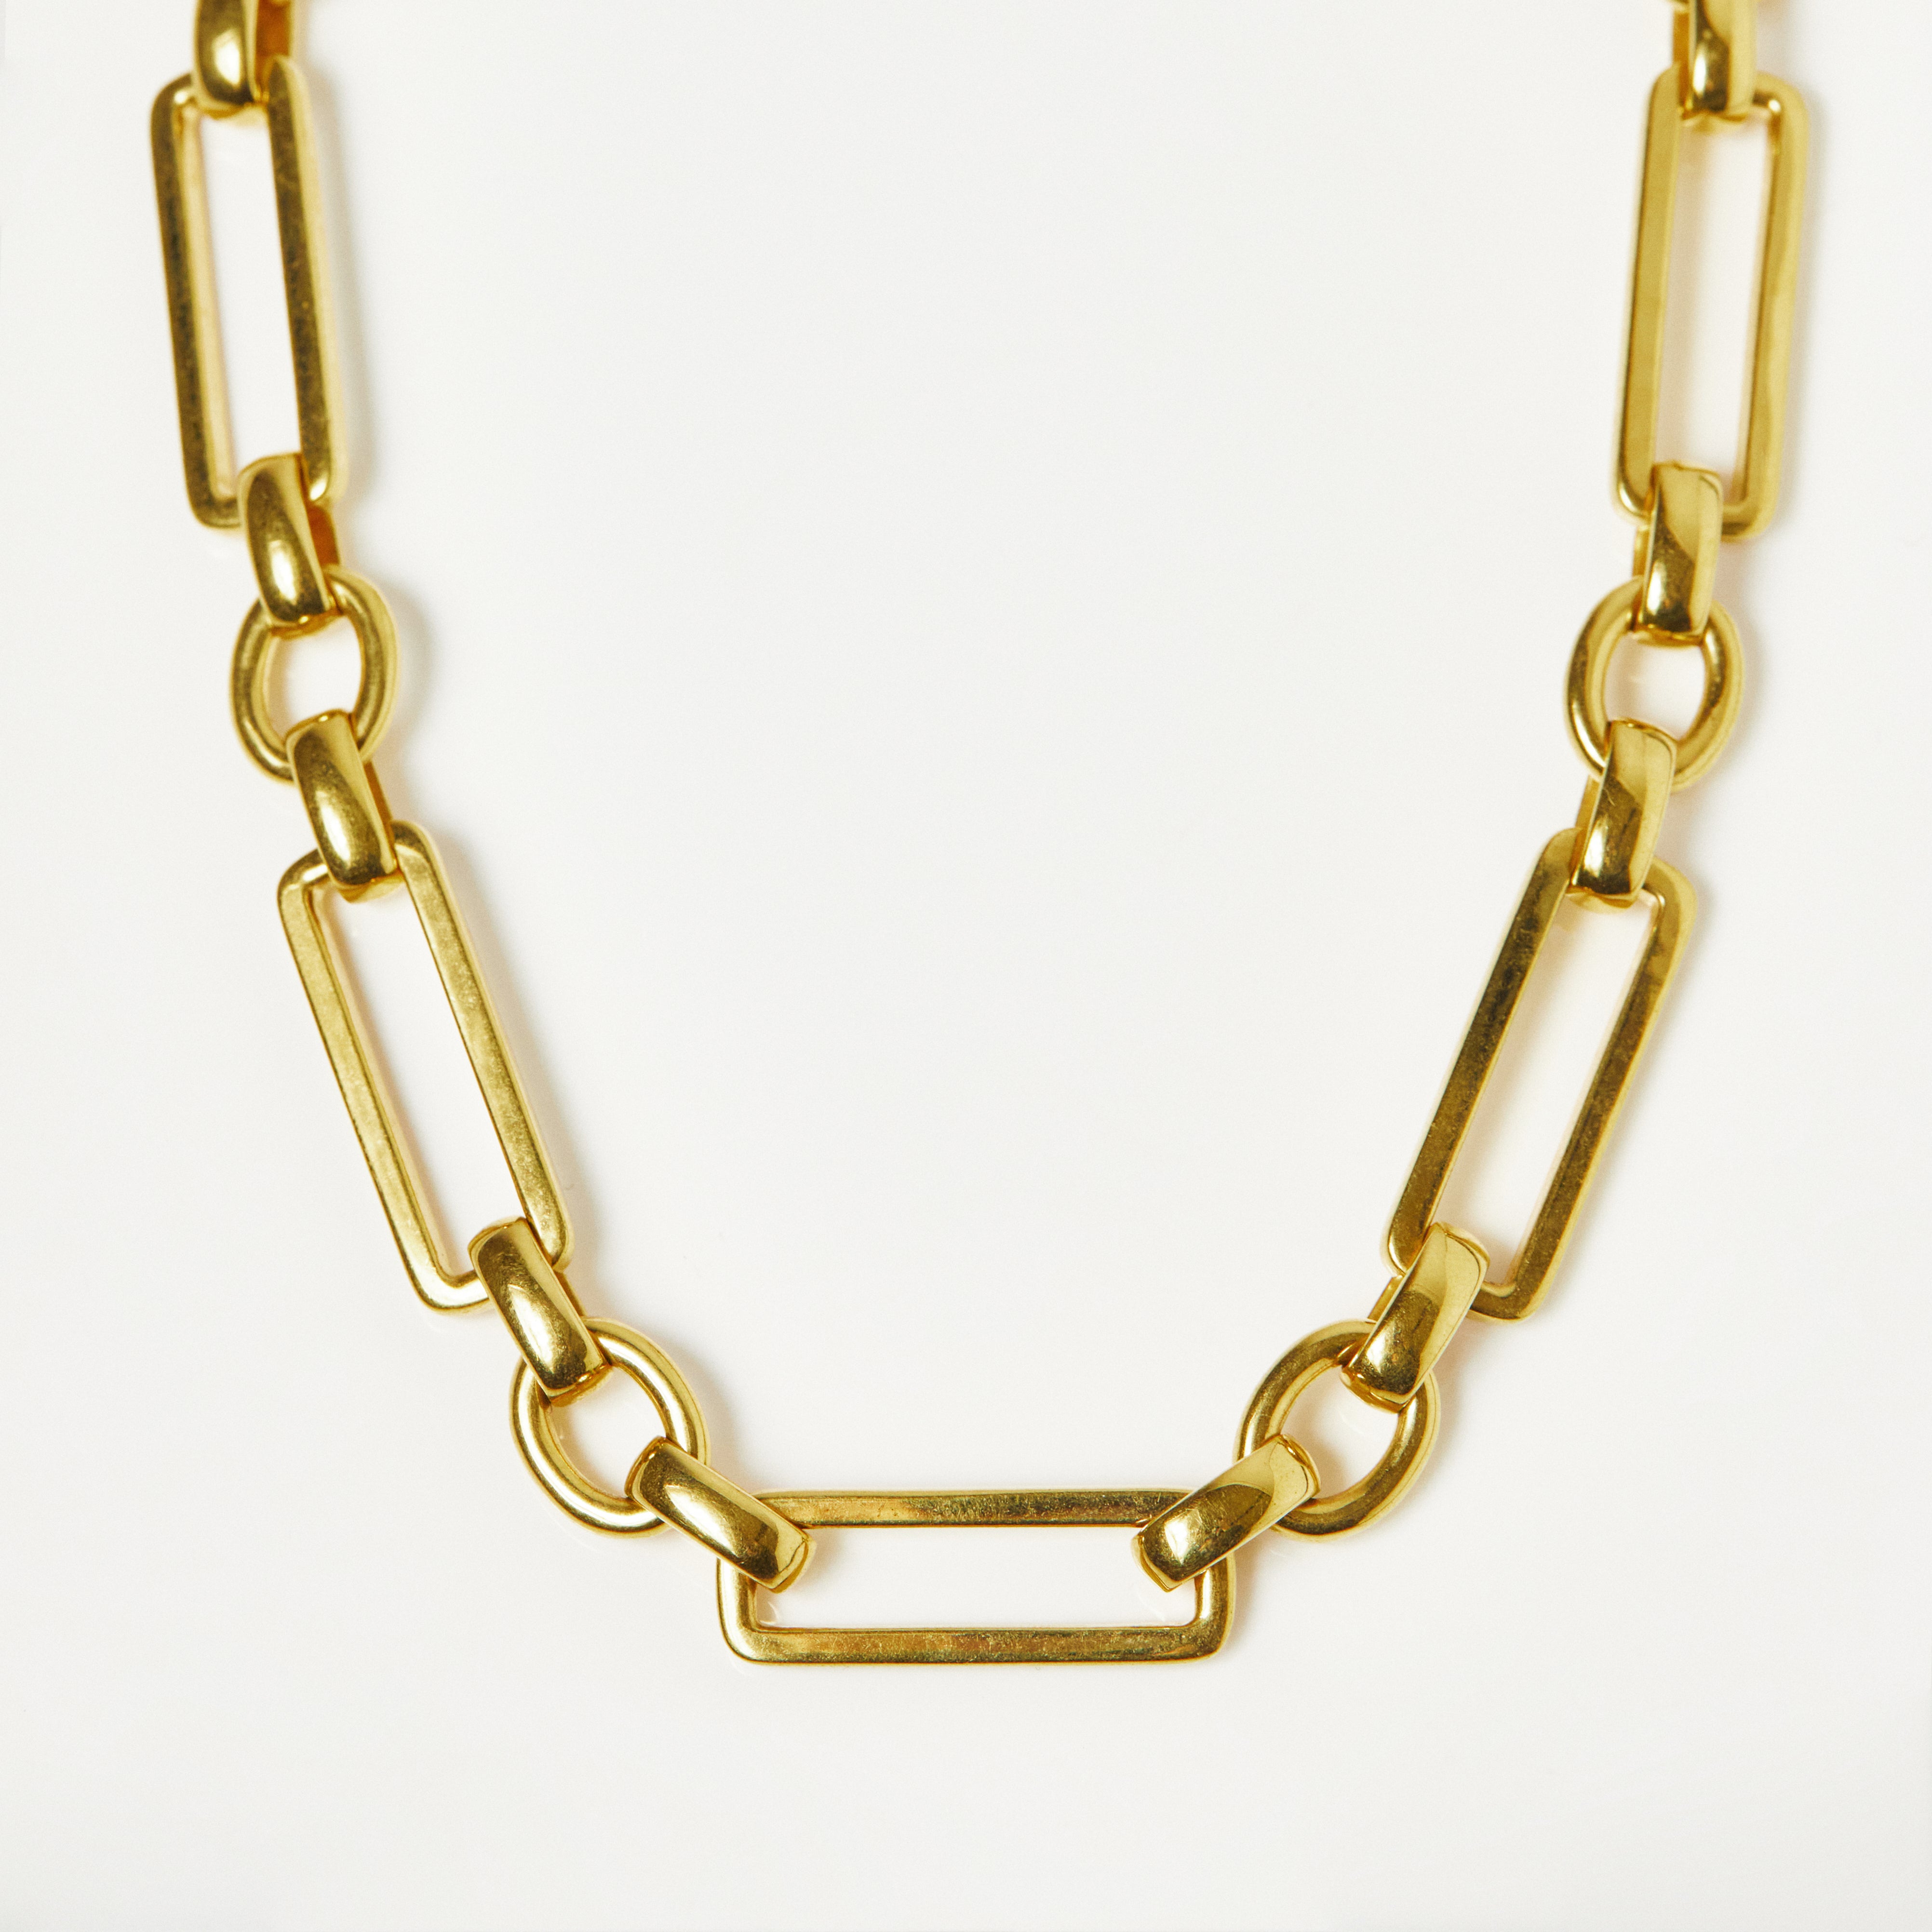 Chunky Rectangular Link Necklace Made in Italy - Marti Rosenburgh Designs